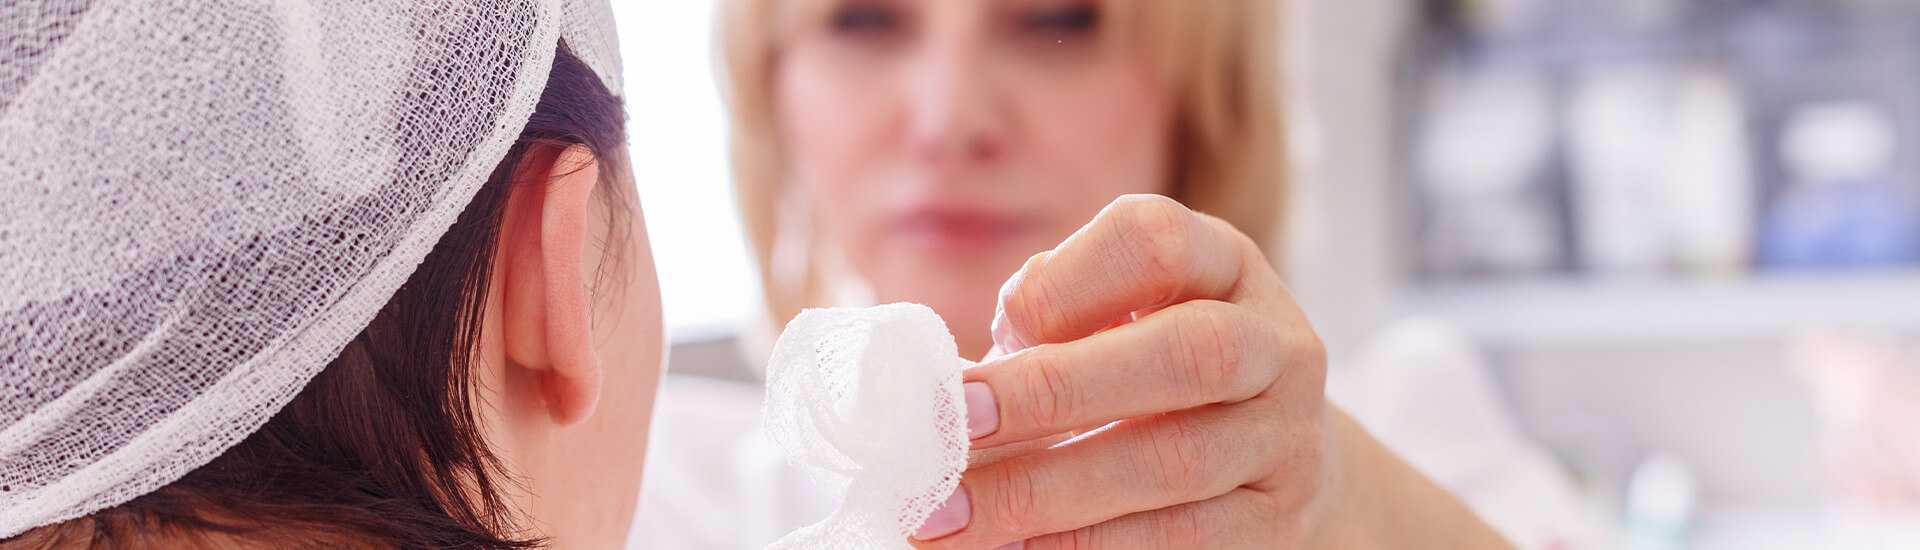 Photo of a doctor removing gauze from a woman's face